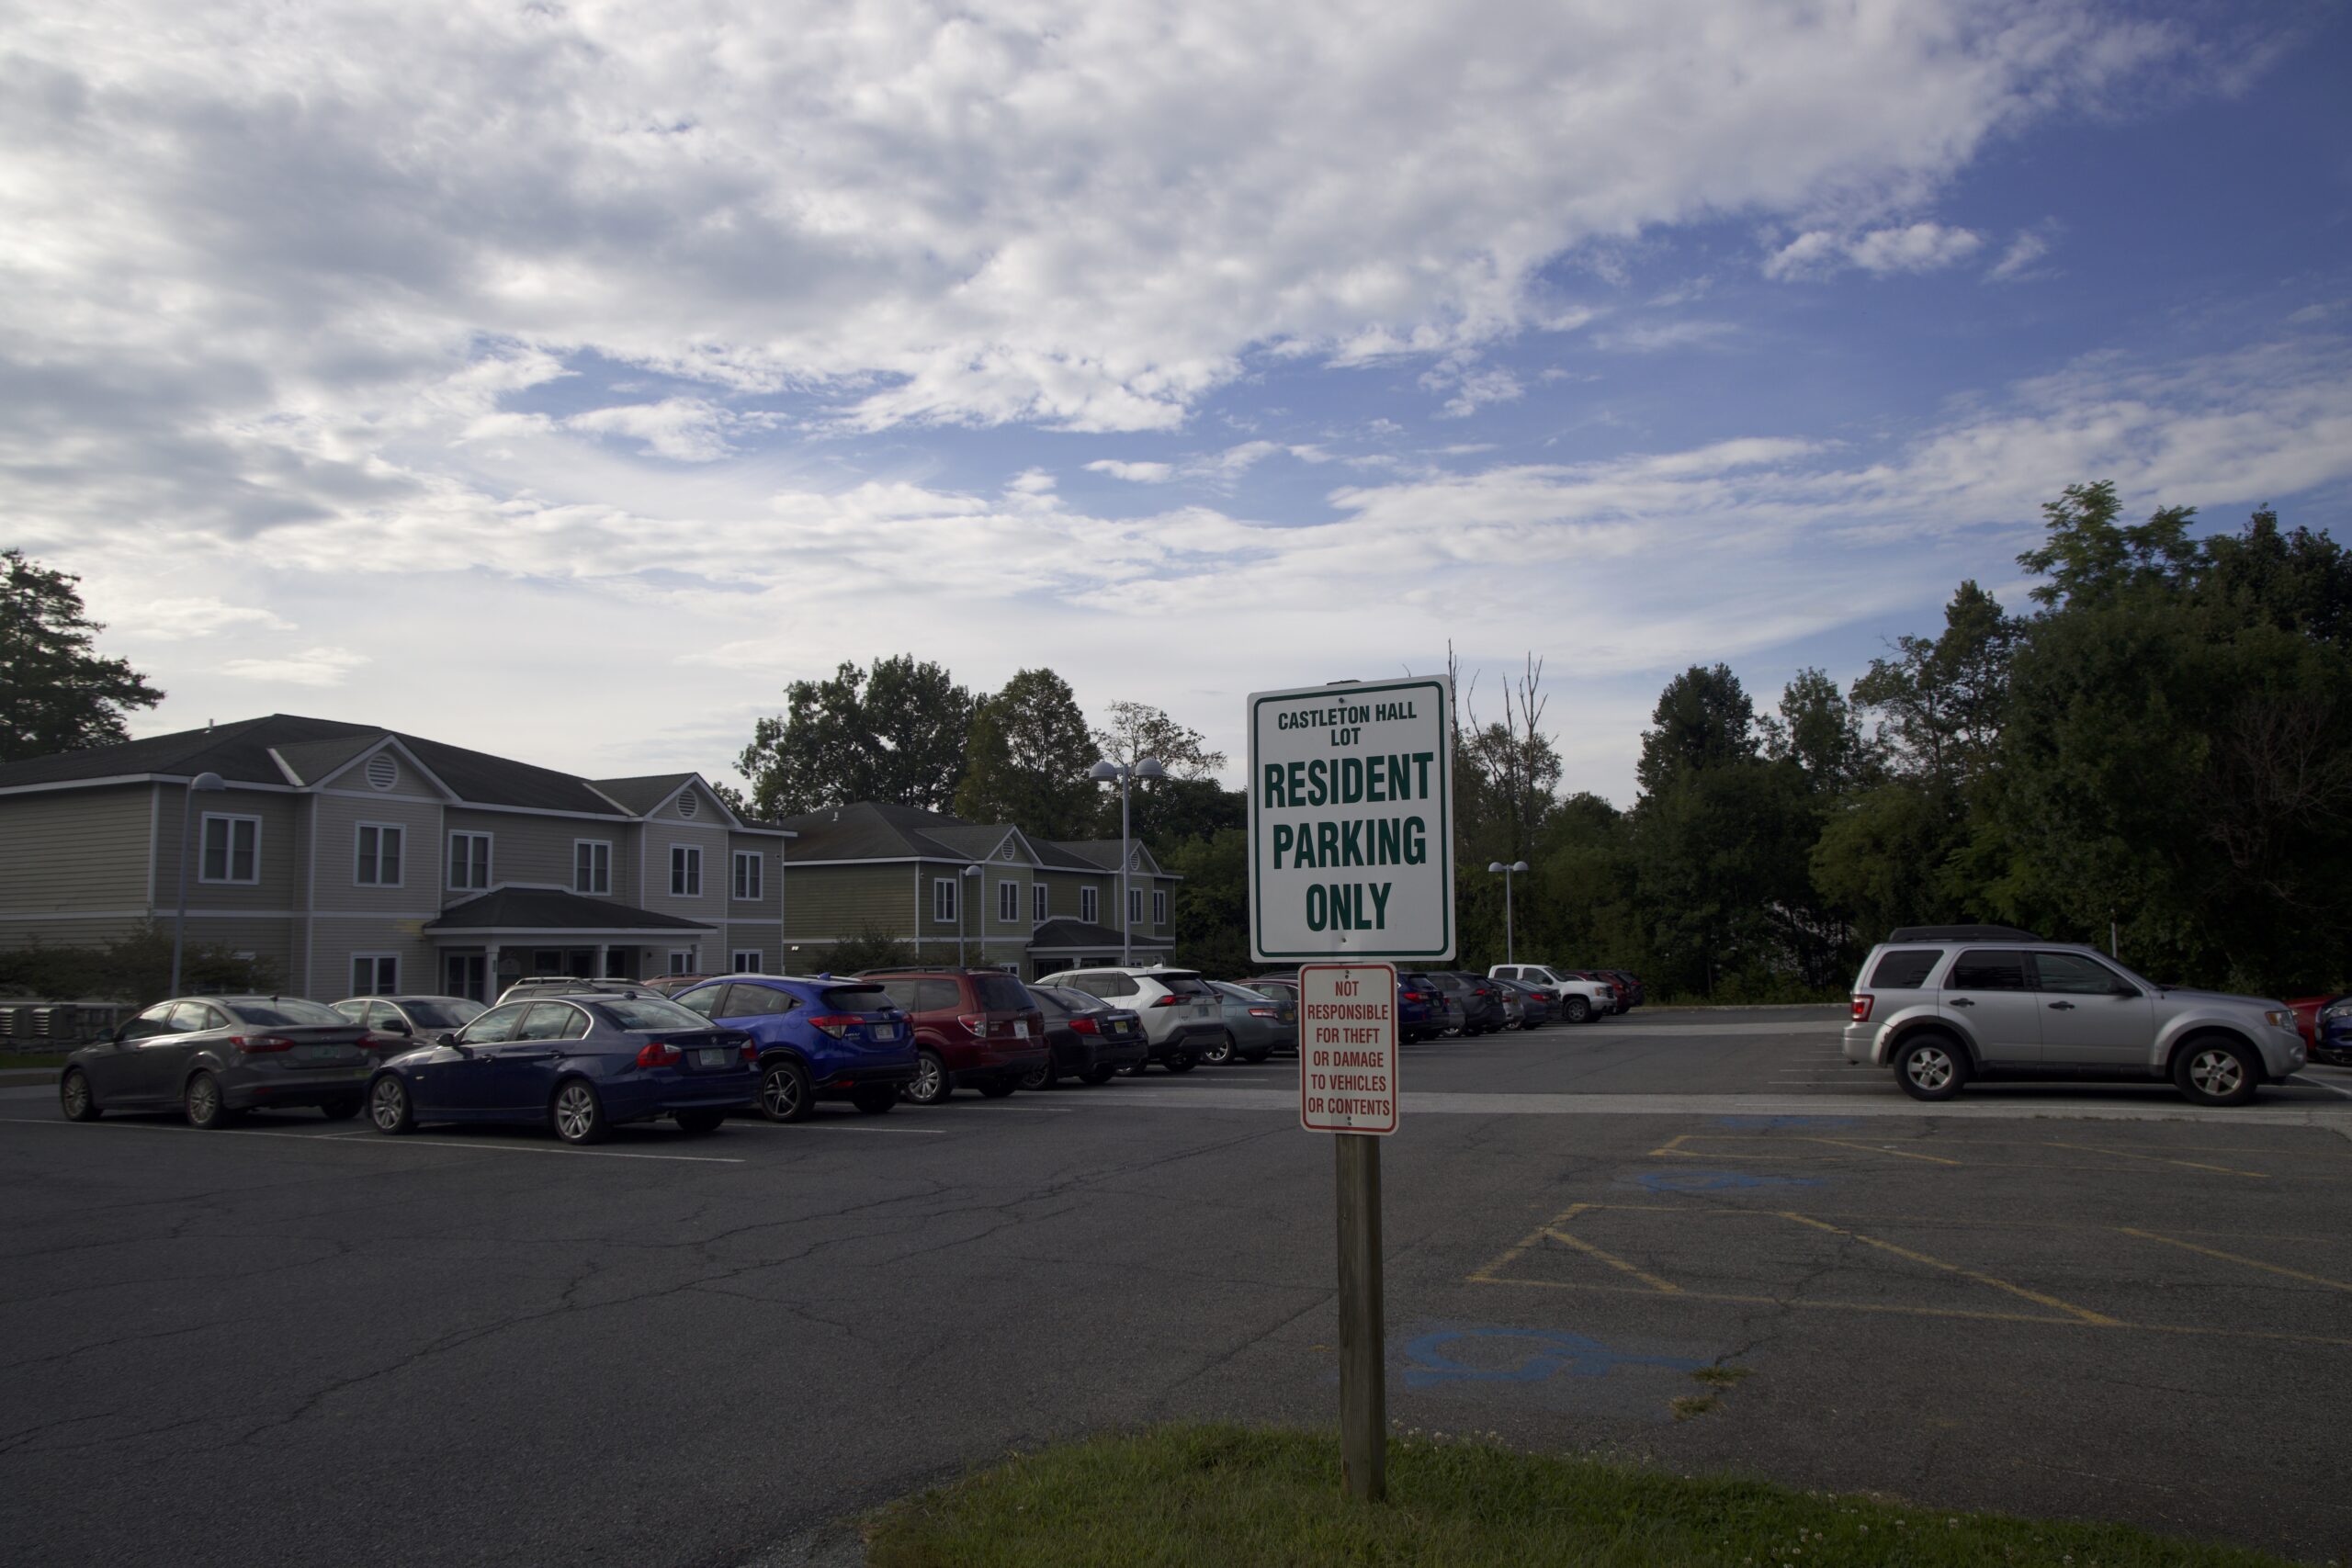 Parking rule changes cause growing pains in wake of merger